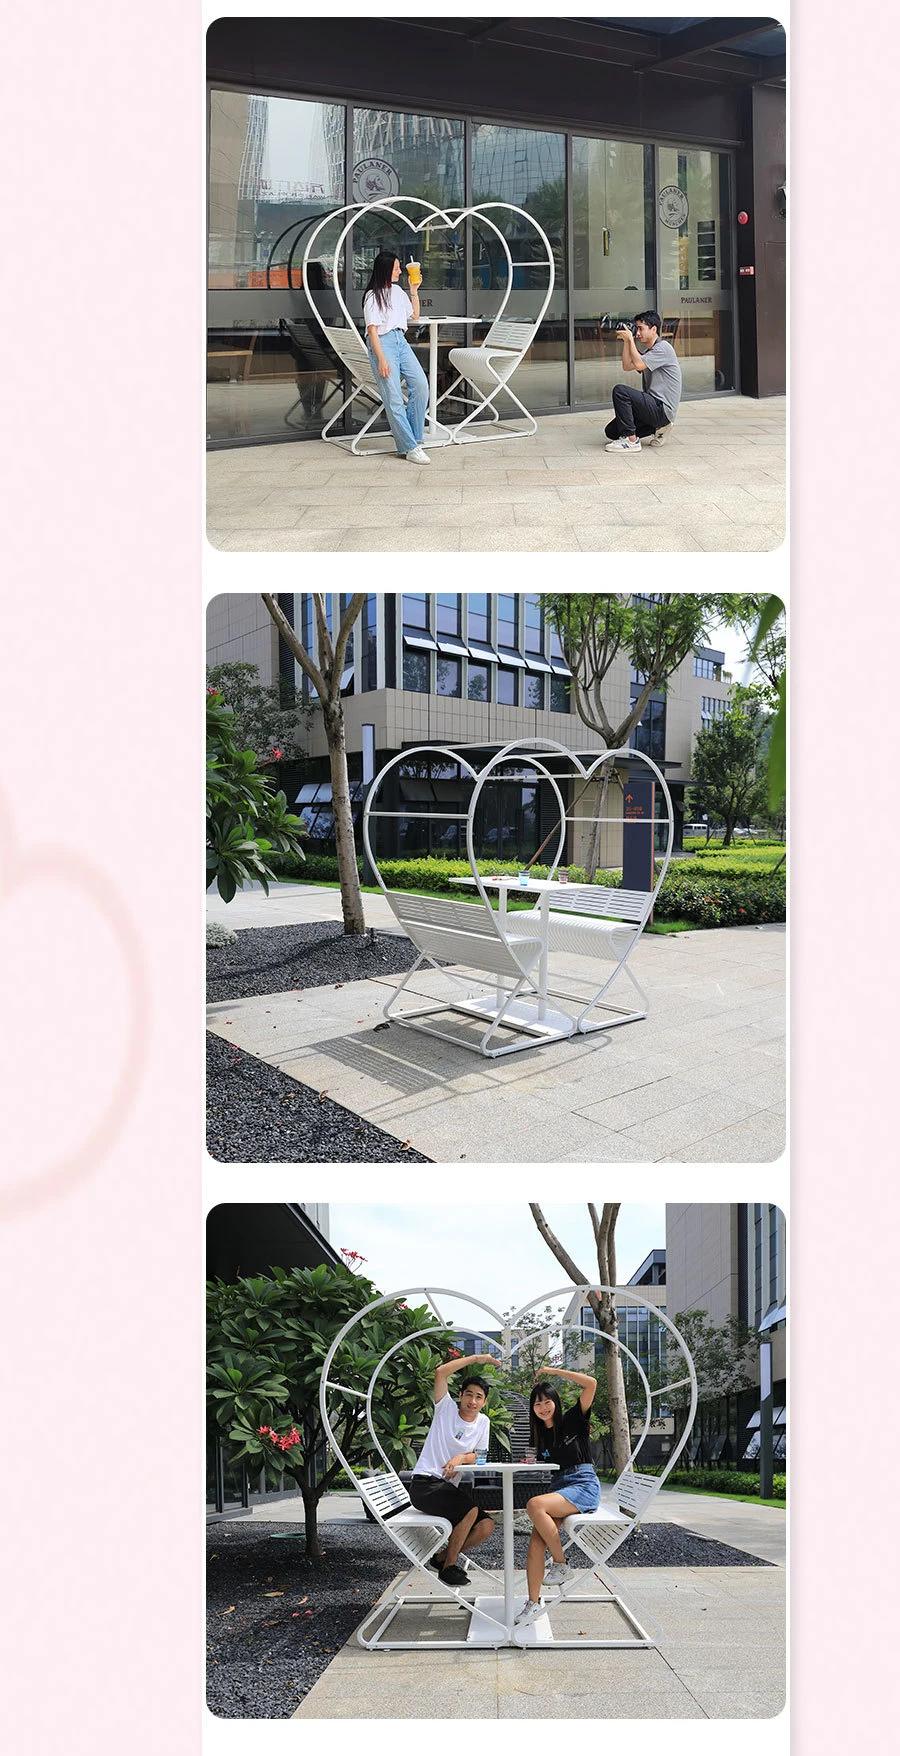 Hot Selling Tourism Photograph Blue Bench OEM Service